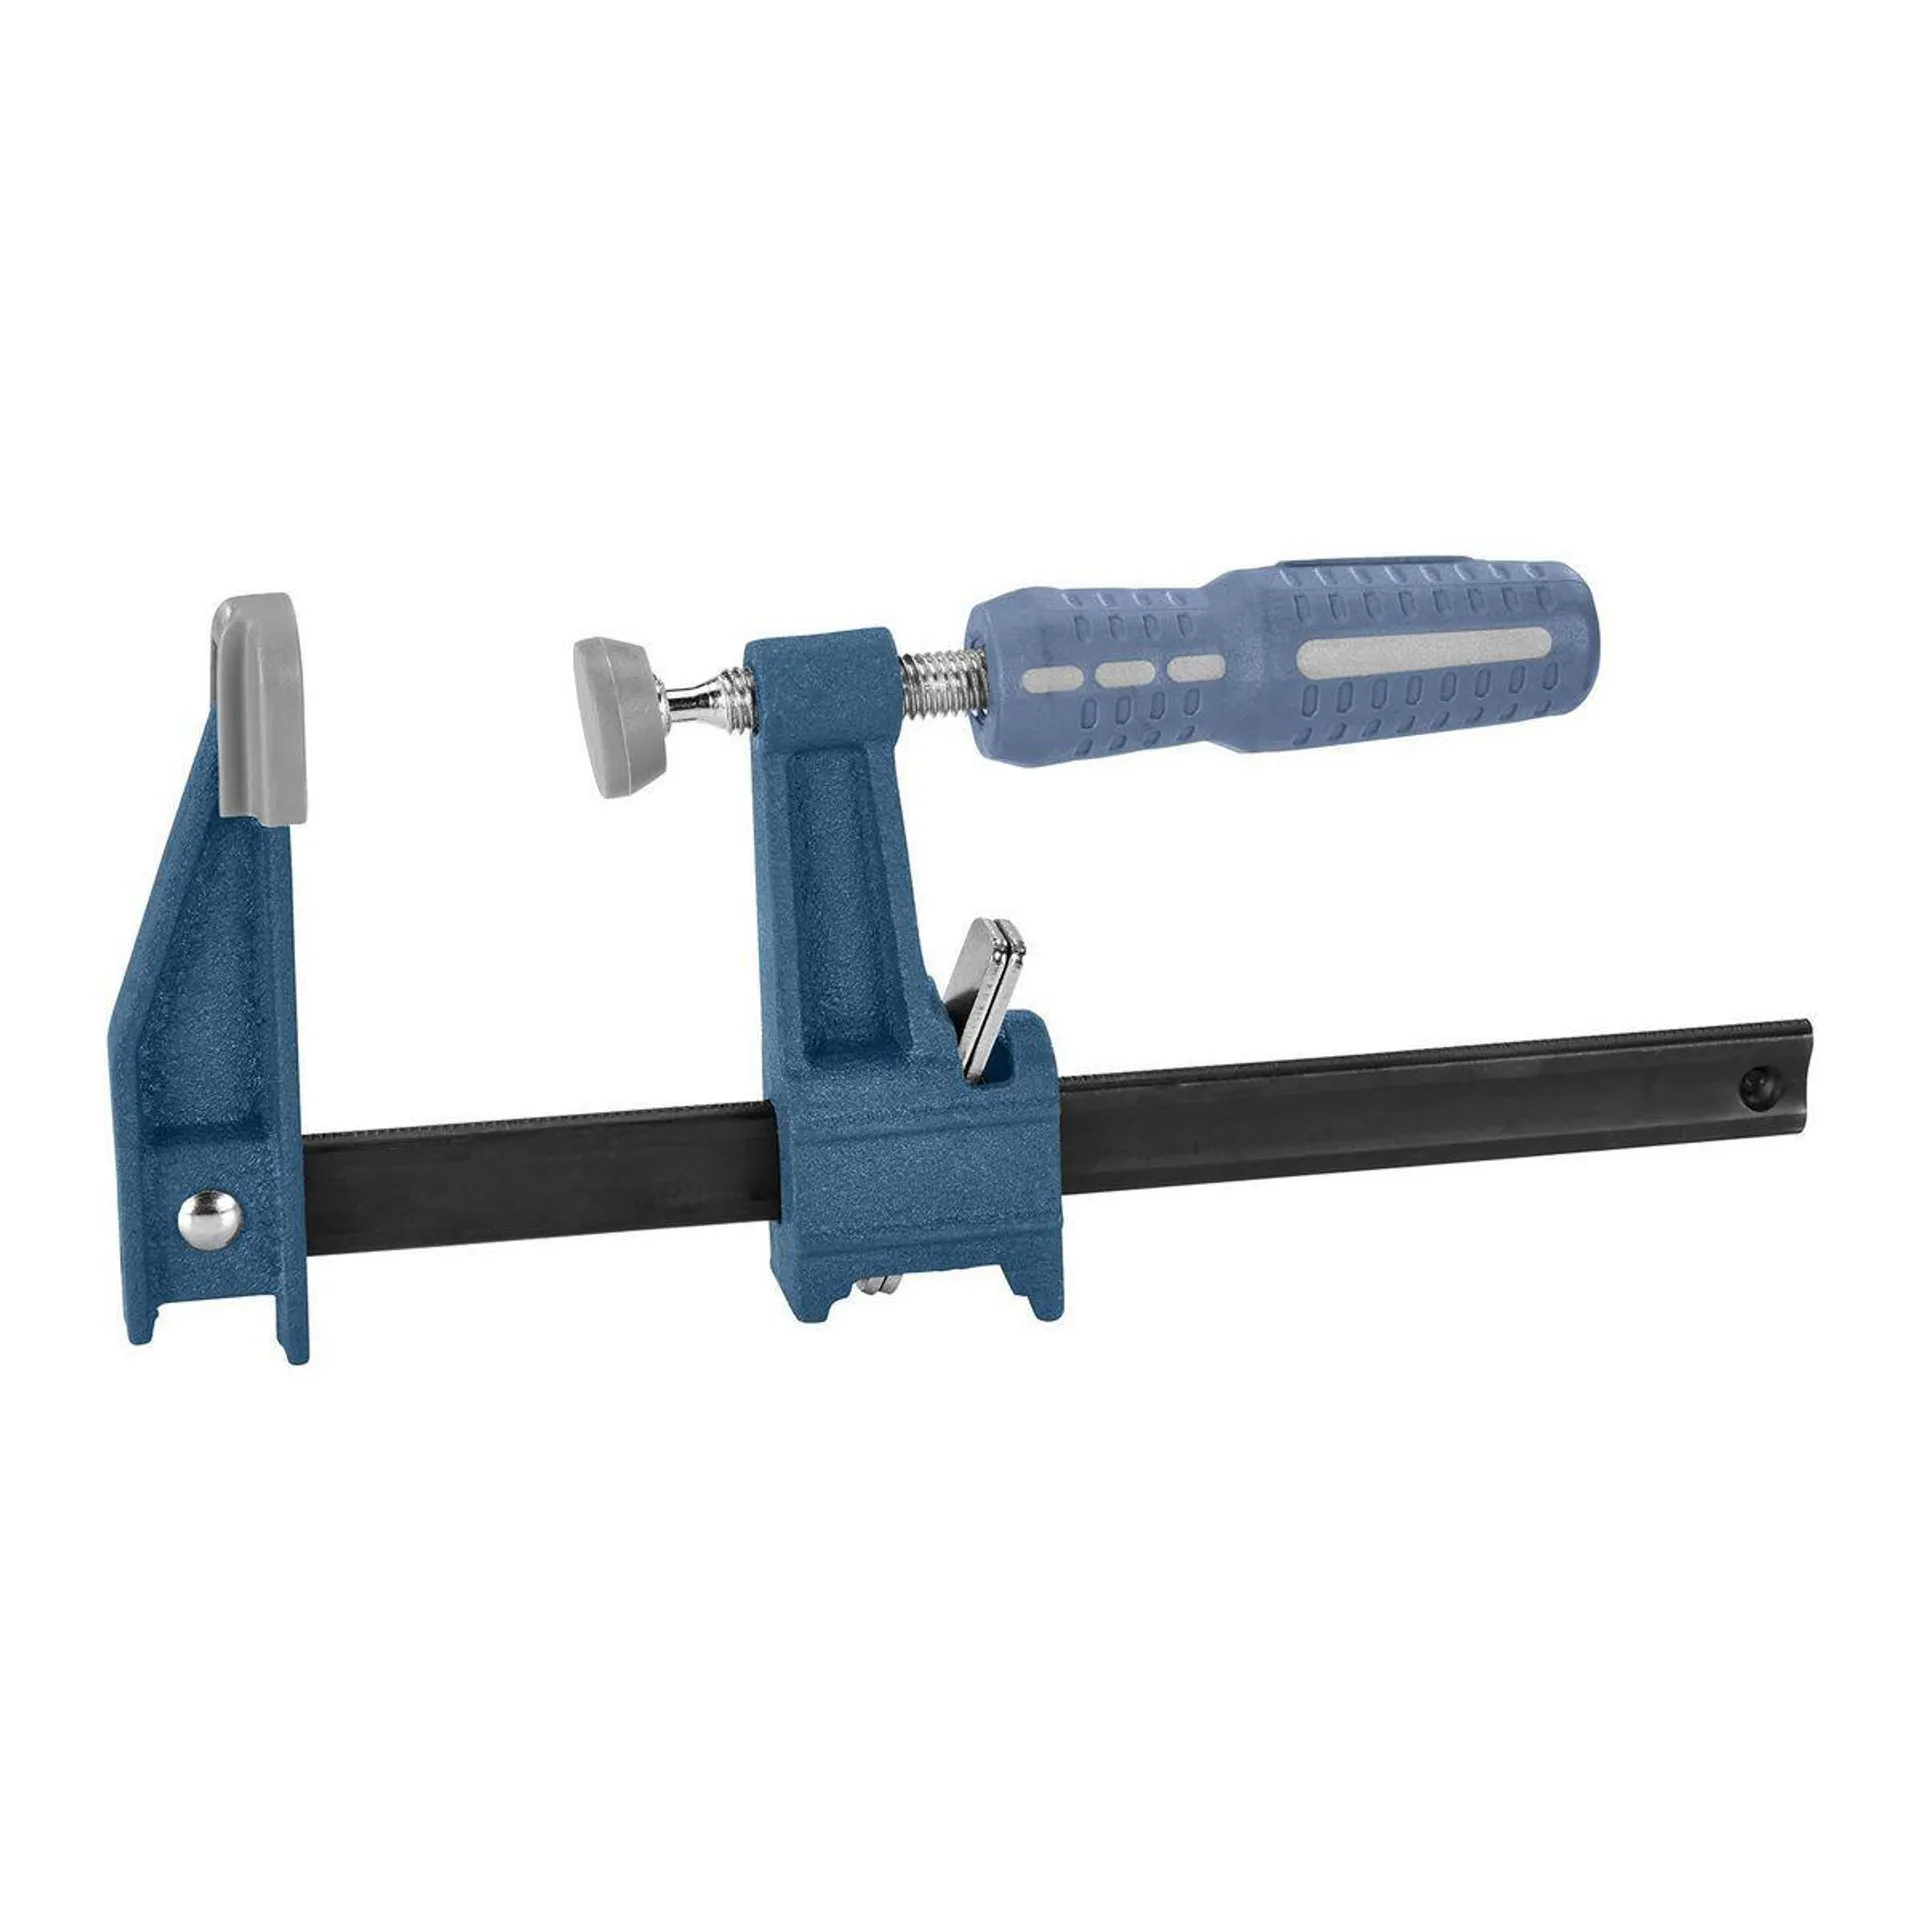 PITTSBURGH 6 in. Quick Release Bar Clamp